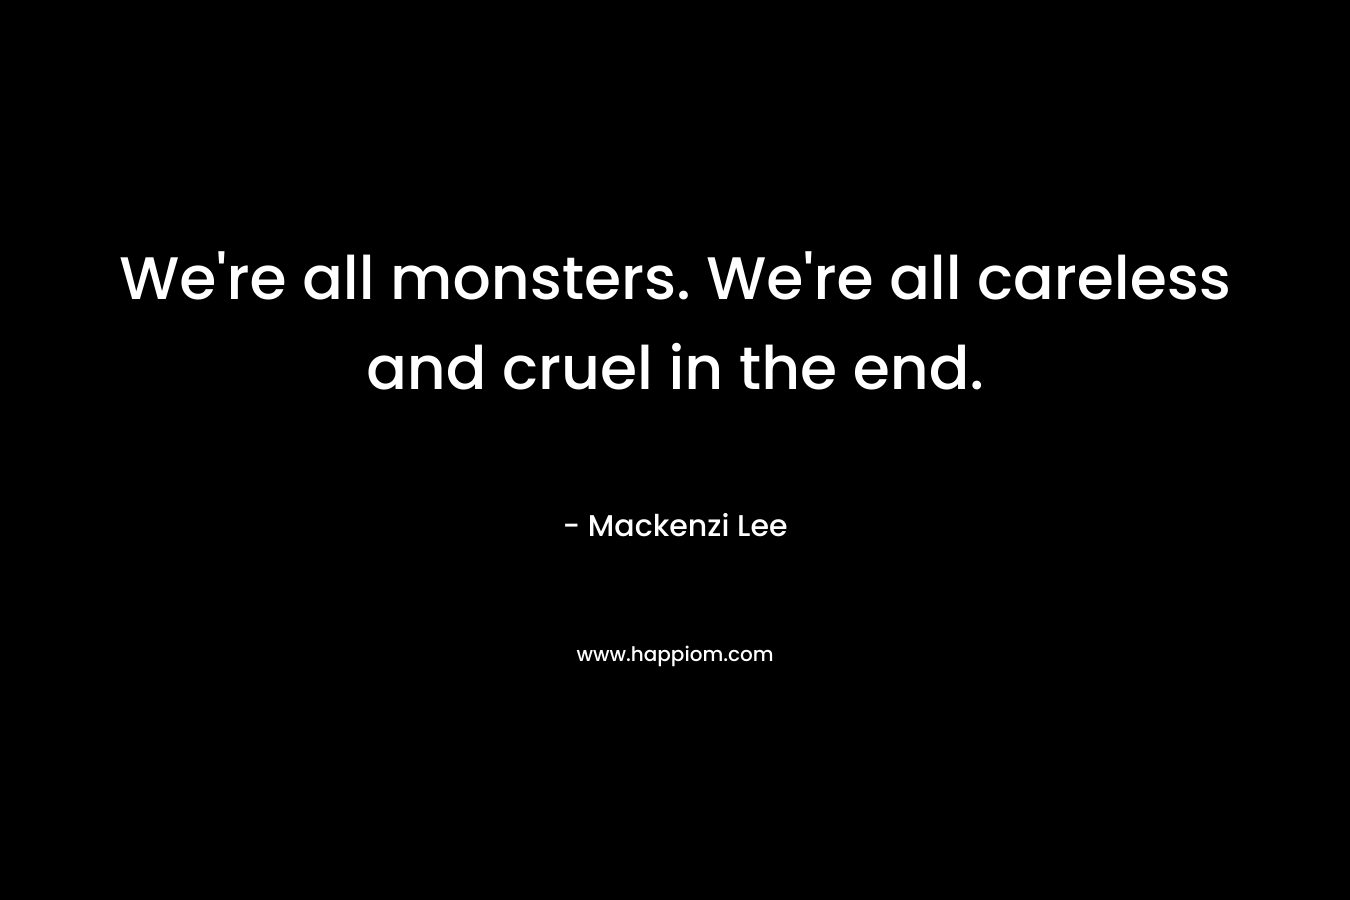 We’re all monsters. We’re all careless and cruel in the end. – Mackenzi Lee